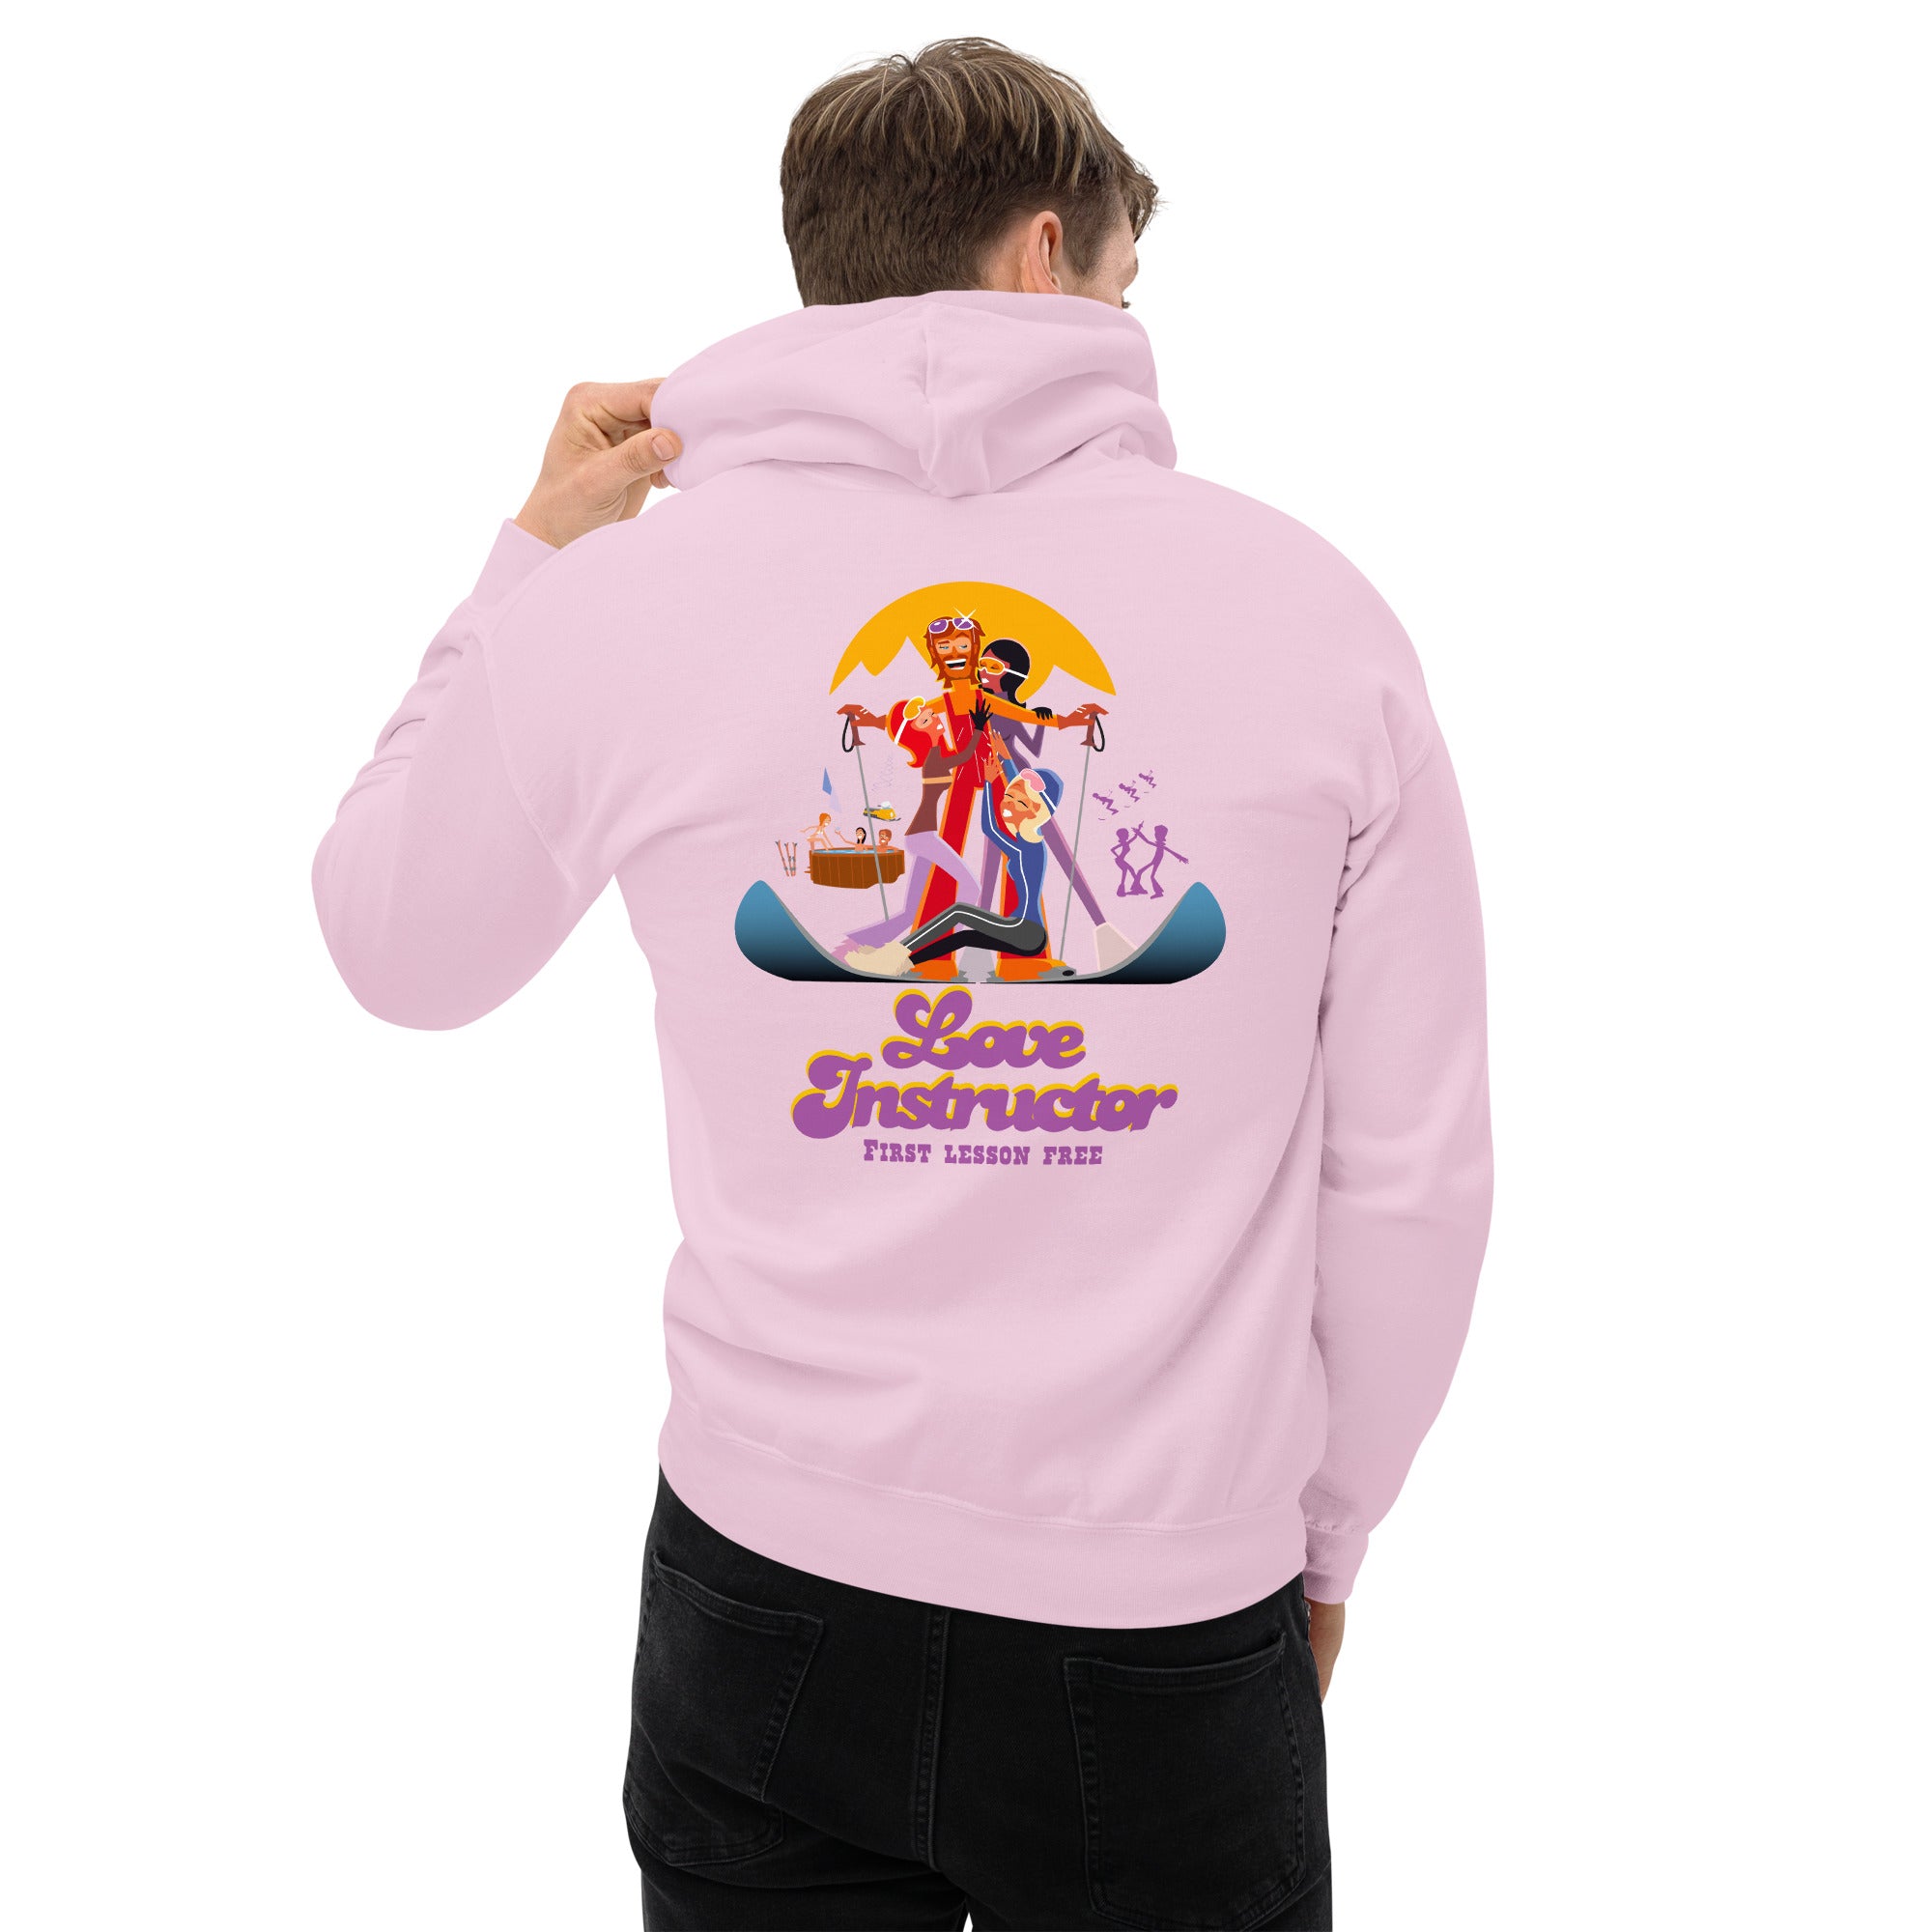 Unisex Hoodie Which skier are you? Love Instructor First Lesson free on light colors (front & back)